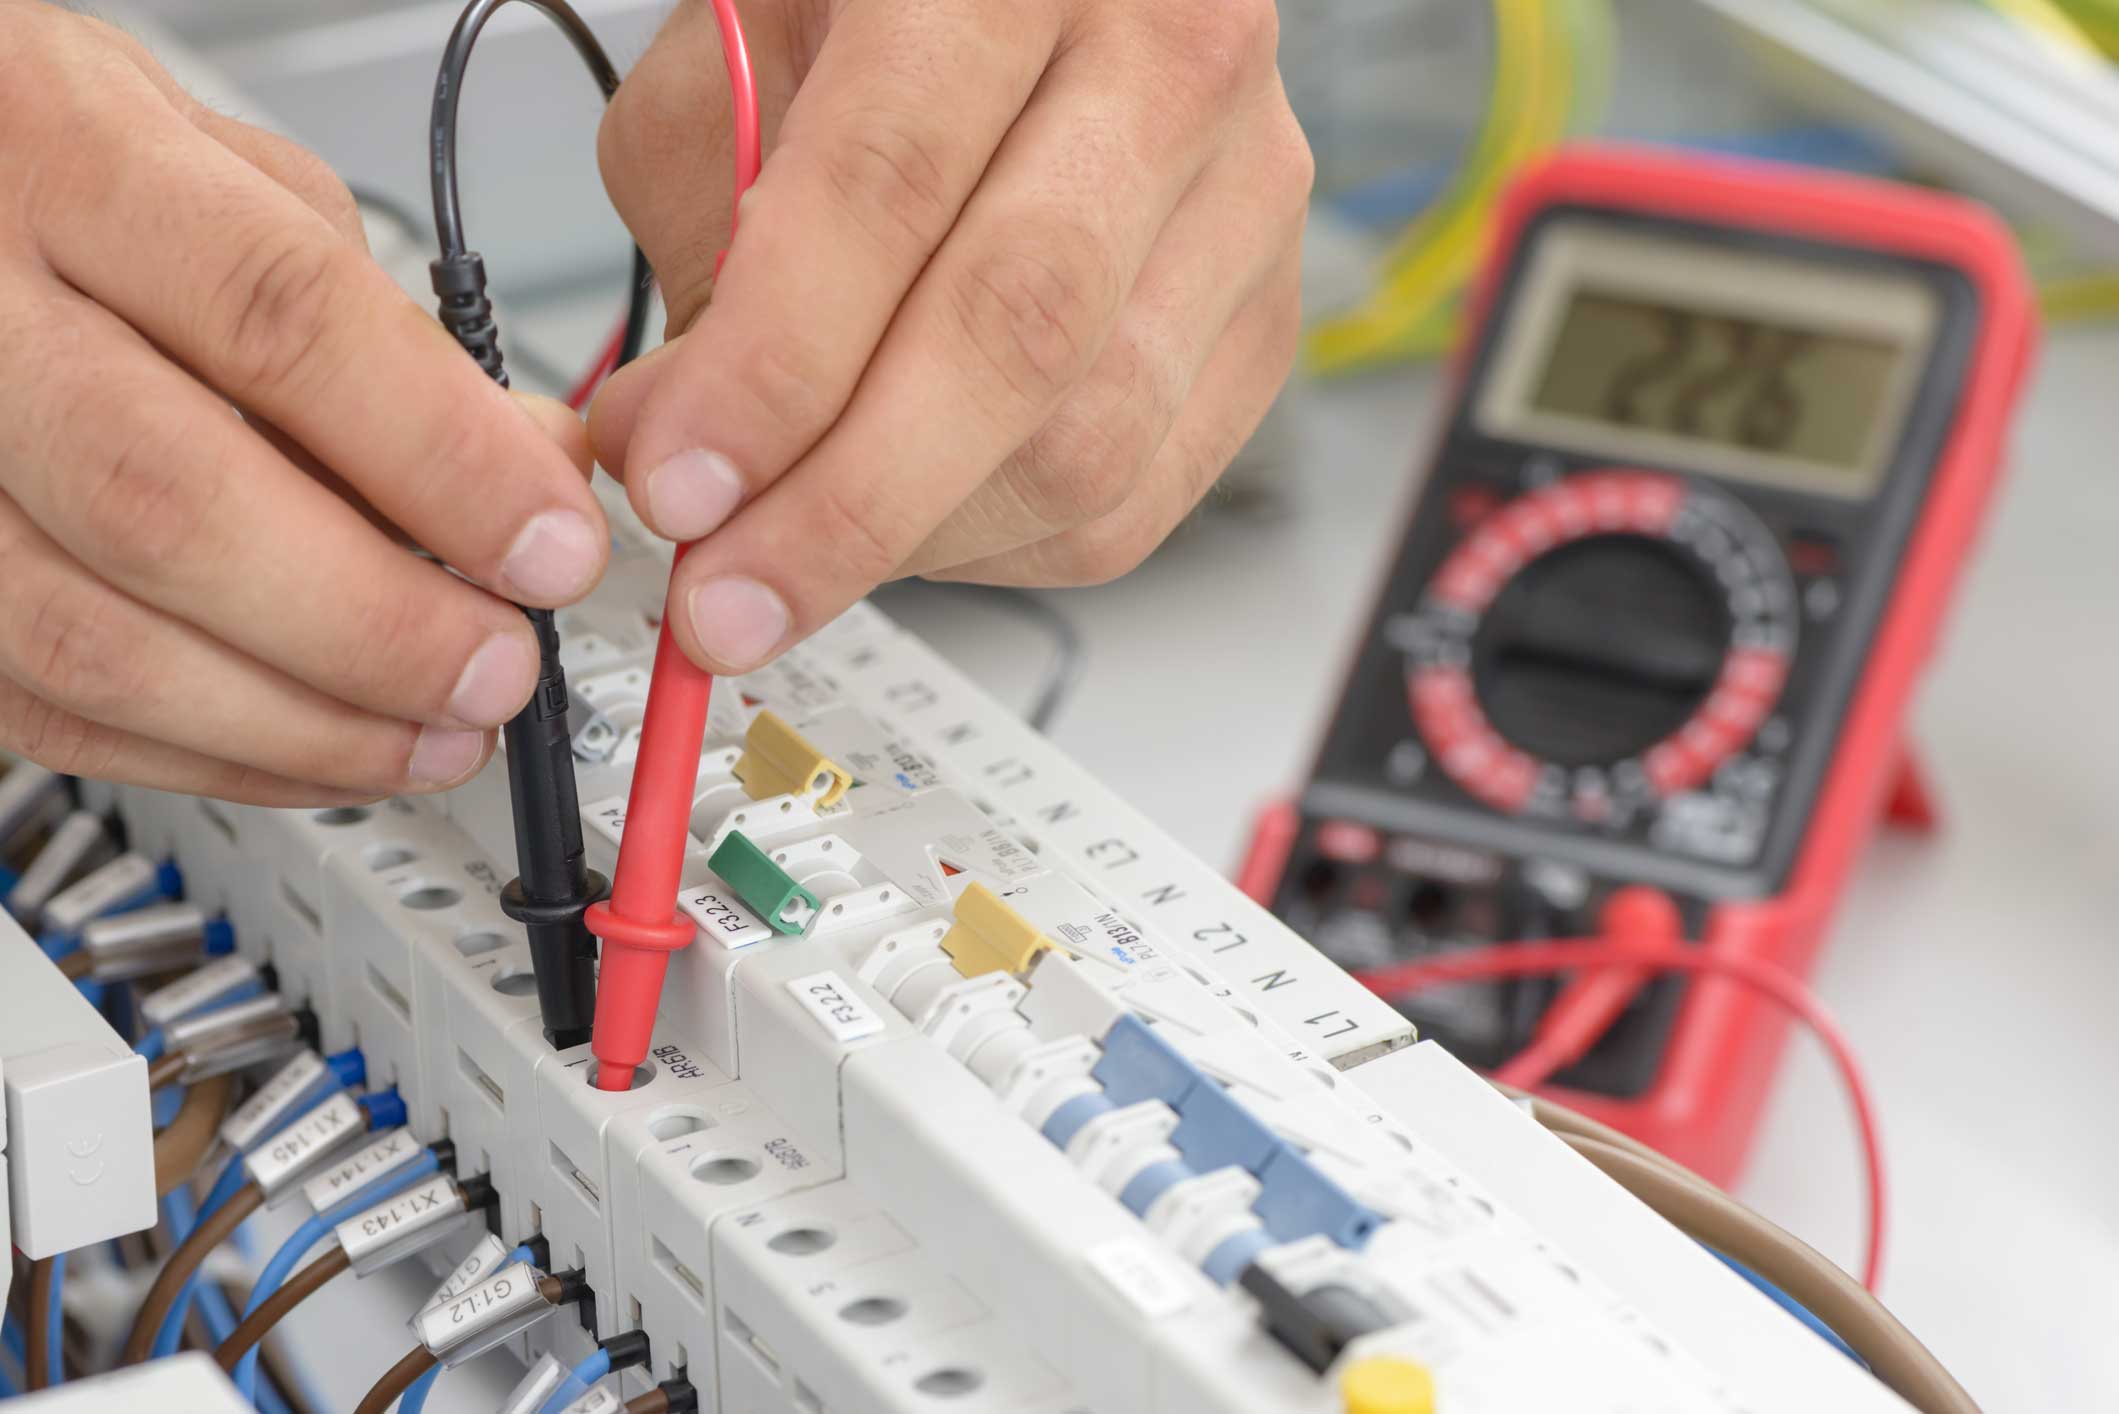 Electrical Testing Services in Powys, Wales